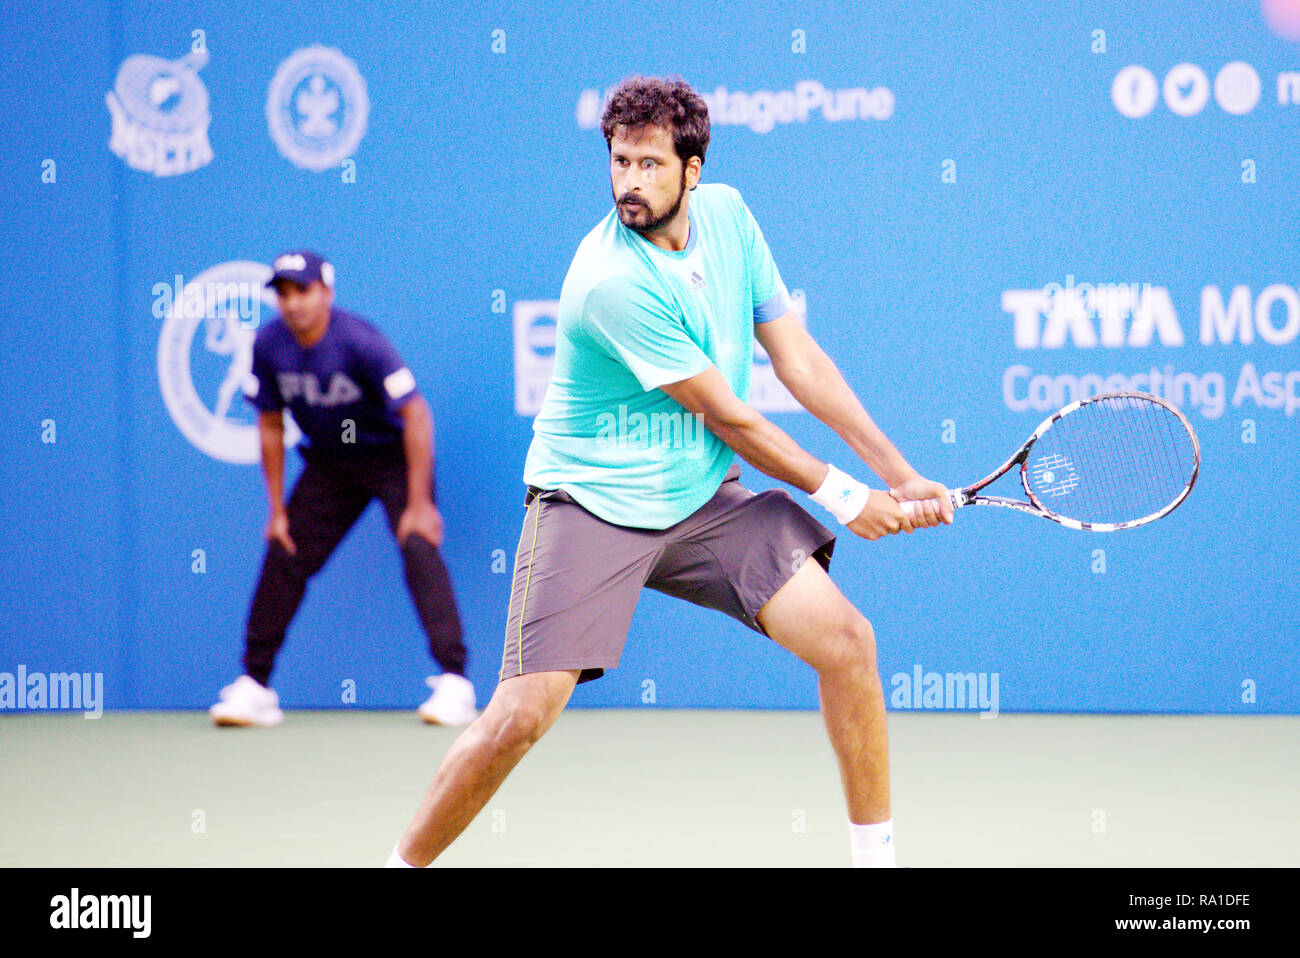 Pune, India. 30th December 2018. Saketh Myneni of India in action in the final round of qualifying singles competition at Tata Open Maharashtra ATP Tennis tournament in Pune, India. Credit: Karunesh Johri/Alamy Live News Stock Photo